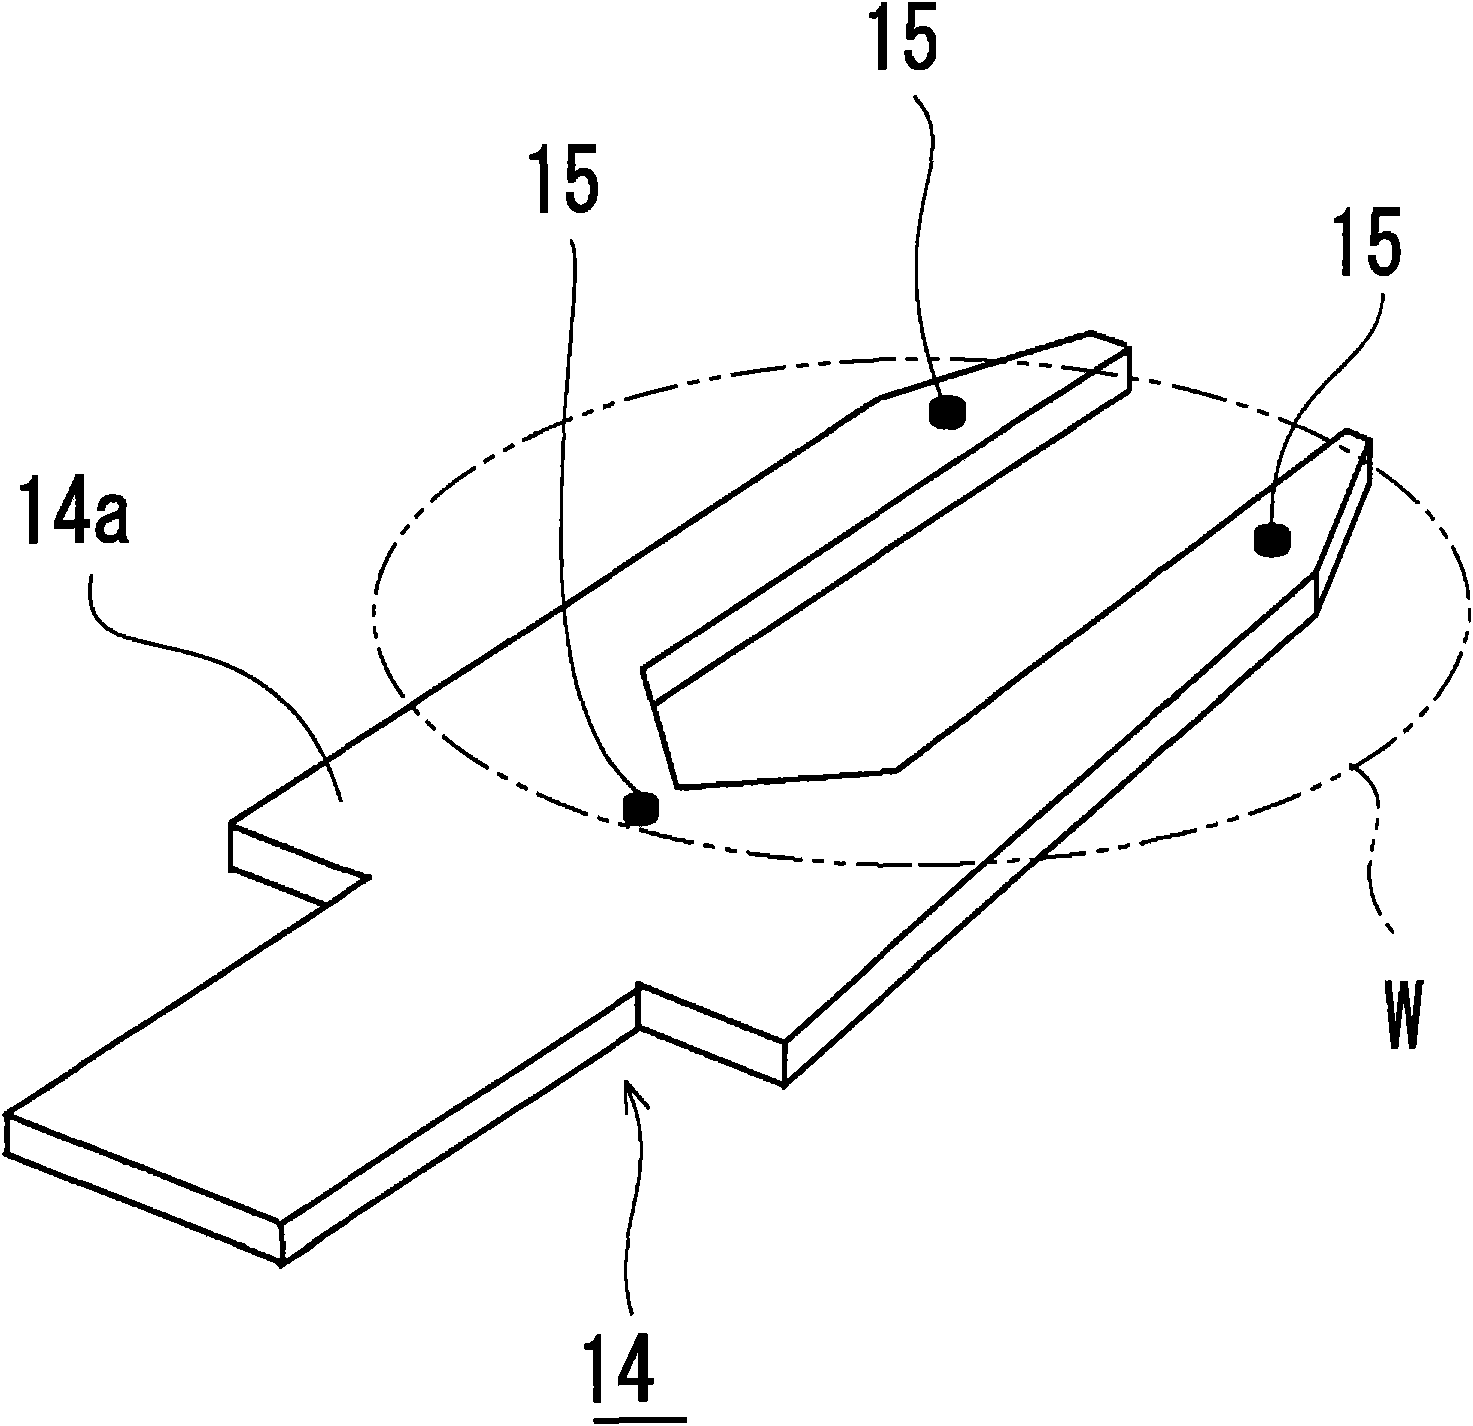 Substrate supporting mechanism